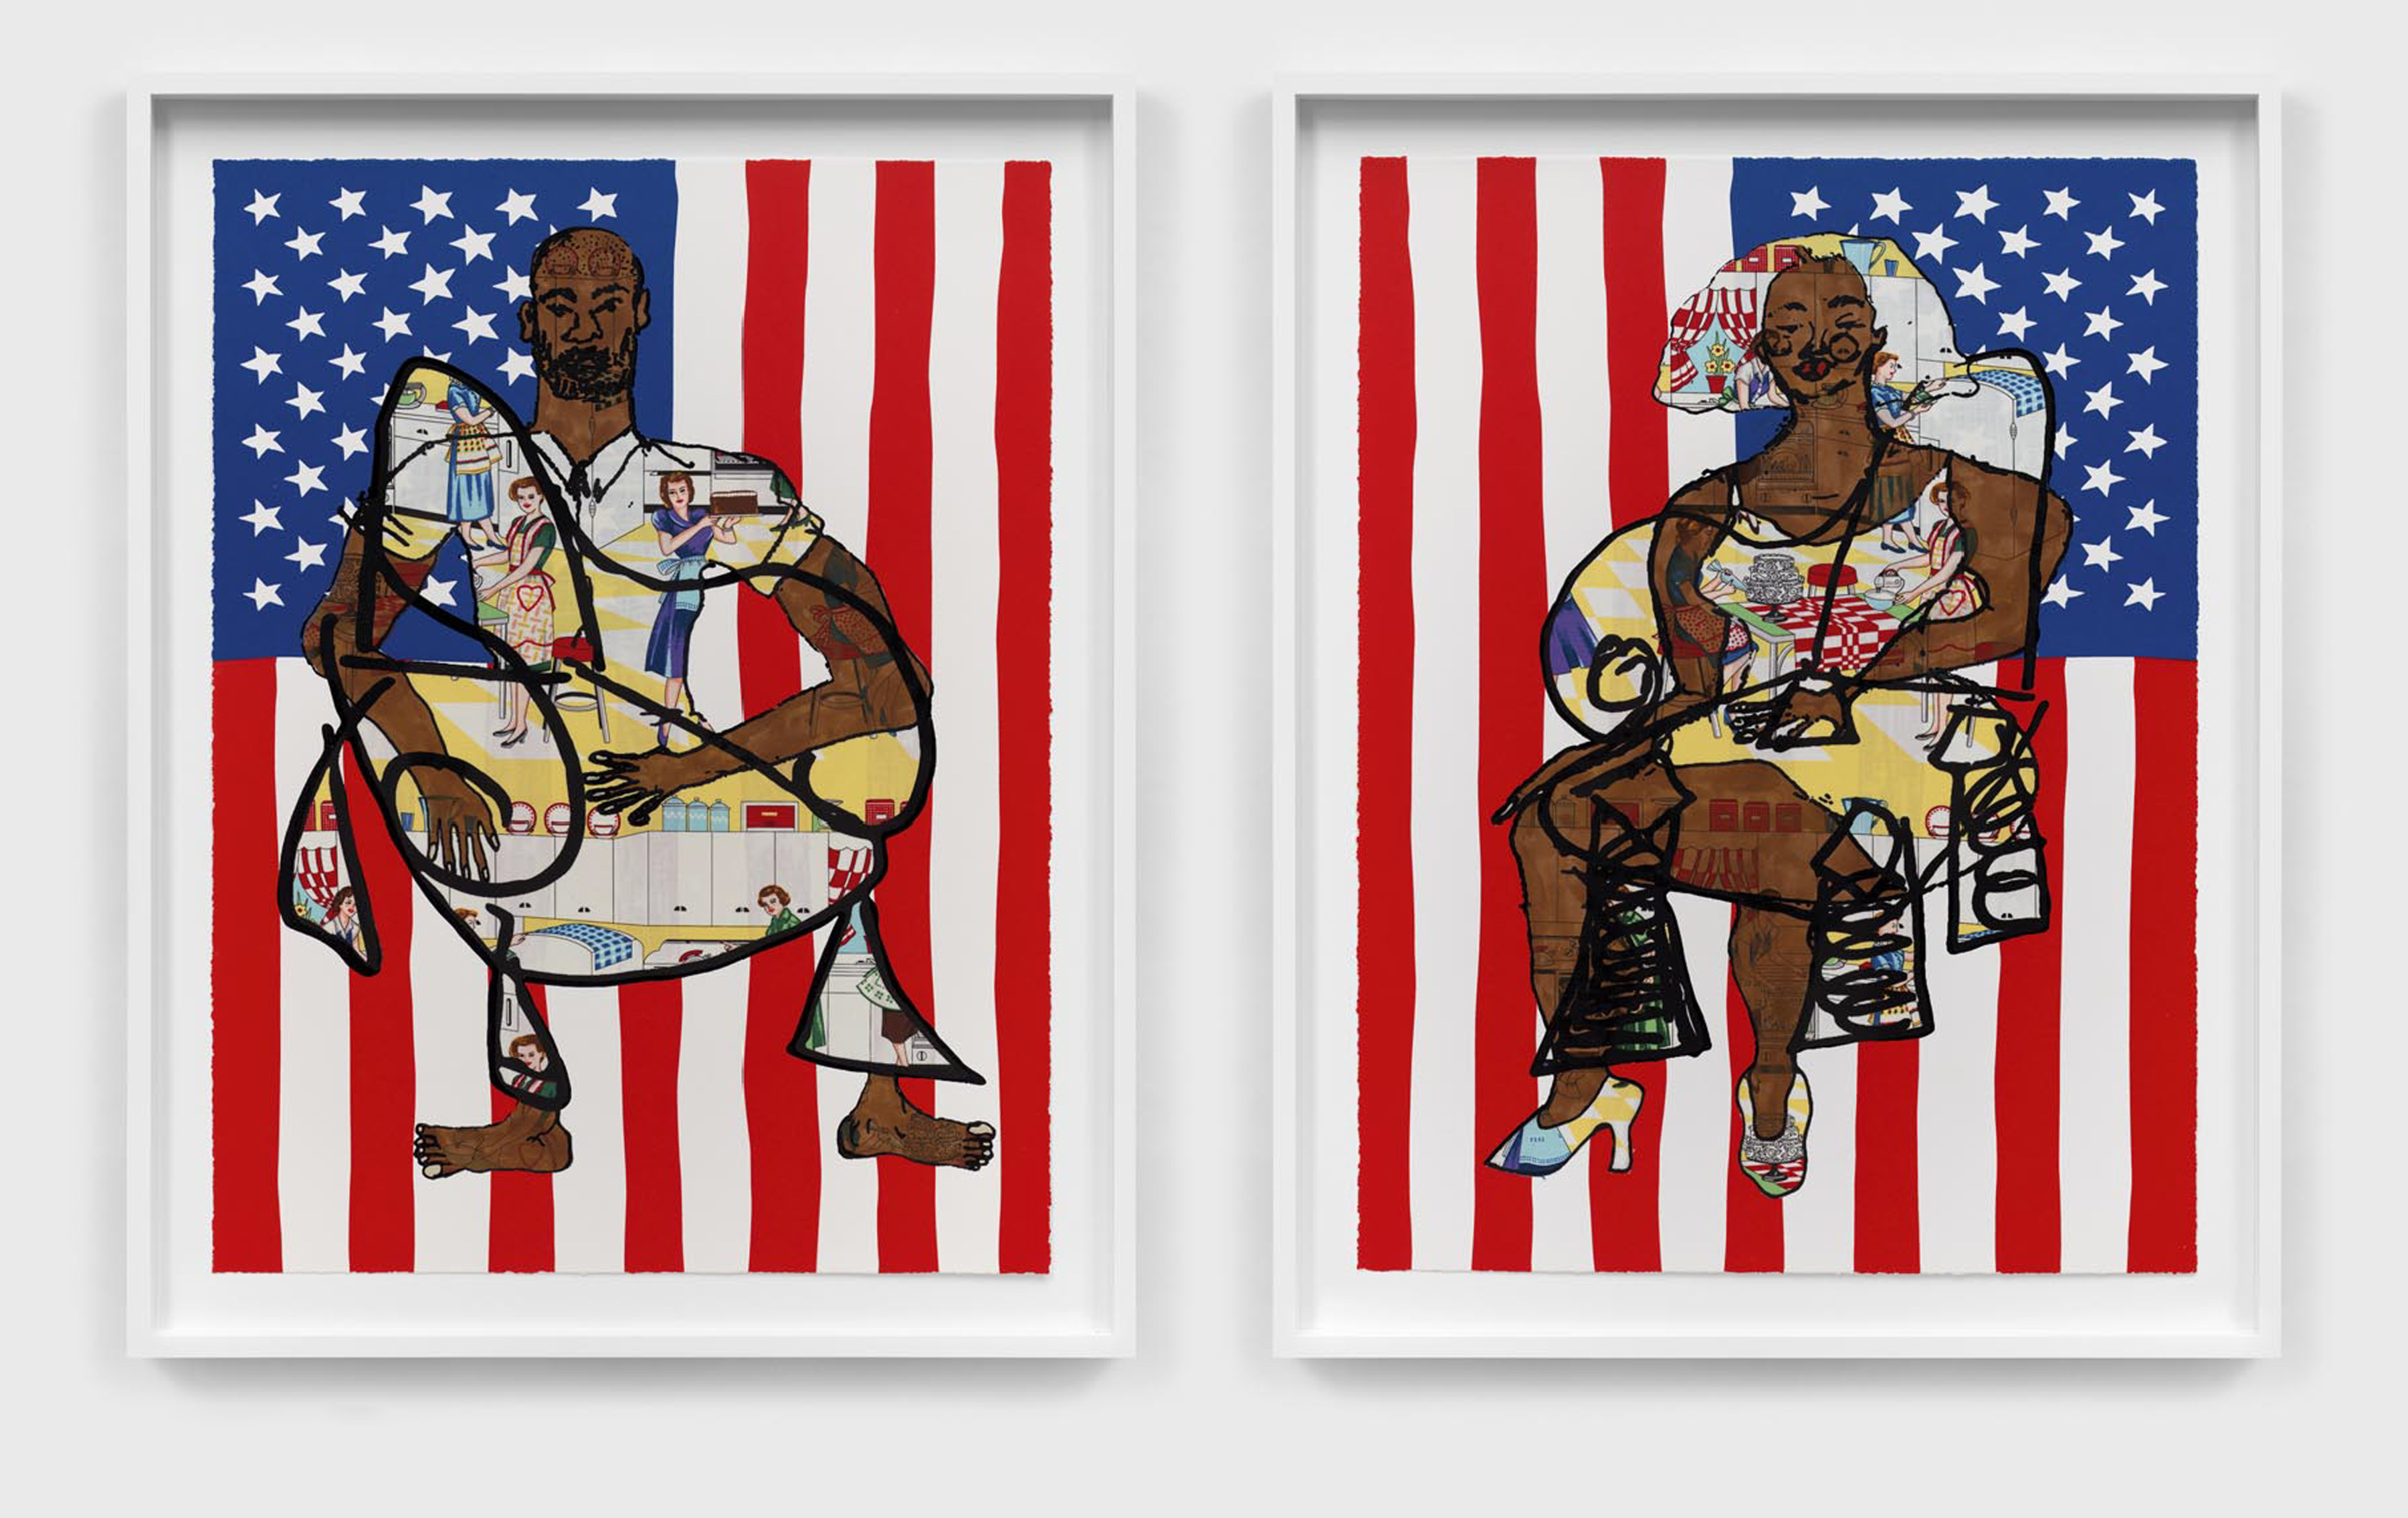 TSCHABALALA SELF

Homebodies - All American 3

2022

Colored pencil, acrylic paint, gouache, charcoal, and graphite on archival inkjet print

Unique variation 10/18 + 3 AP

2 prints, each 61 x 45.5 cm / 24 x 18 in

Frames, each 70.5 x 55.5 cm / 27 3/4 x 21 7/8 in

&amp;nbsp;